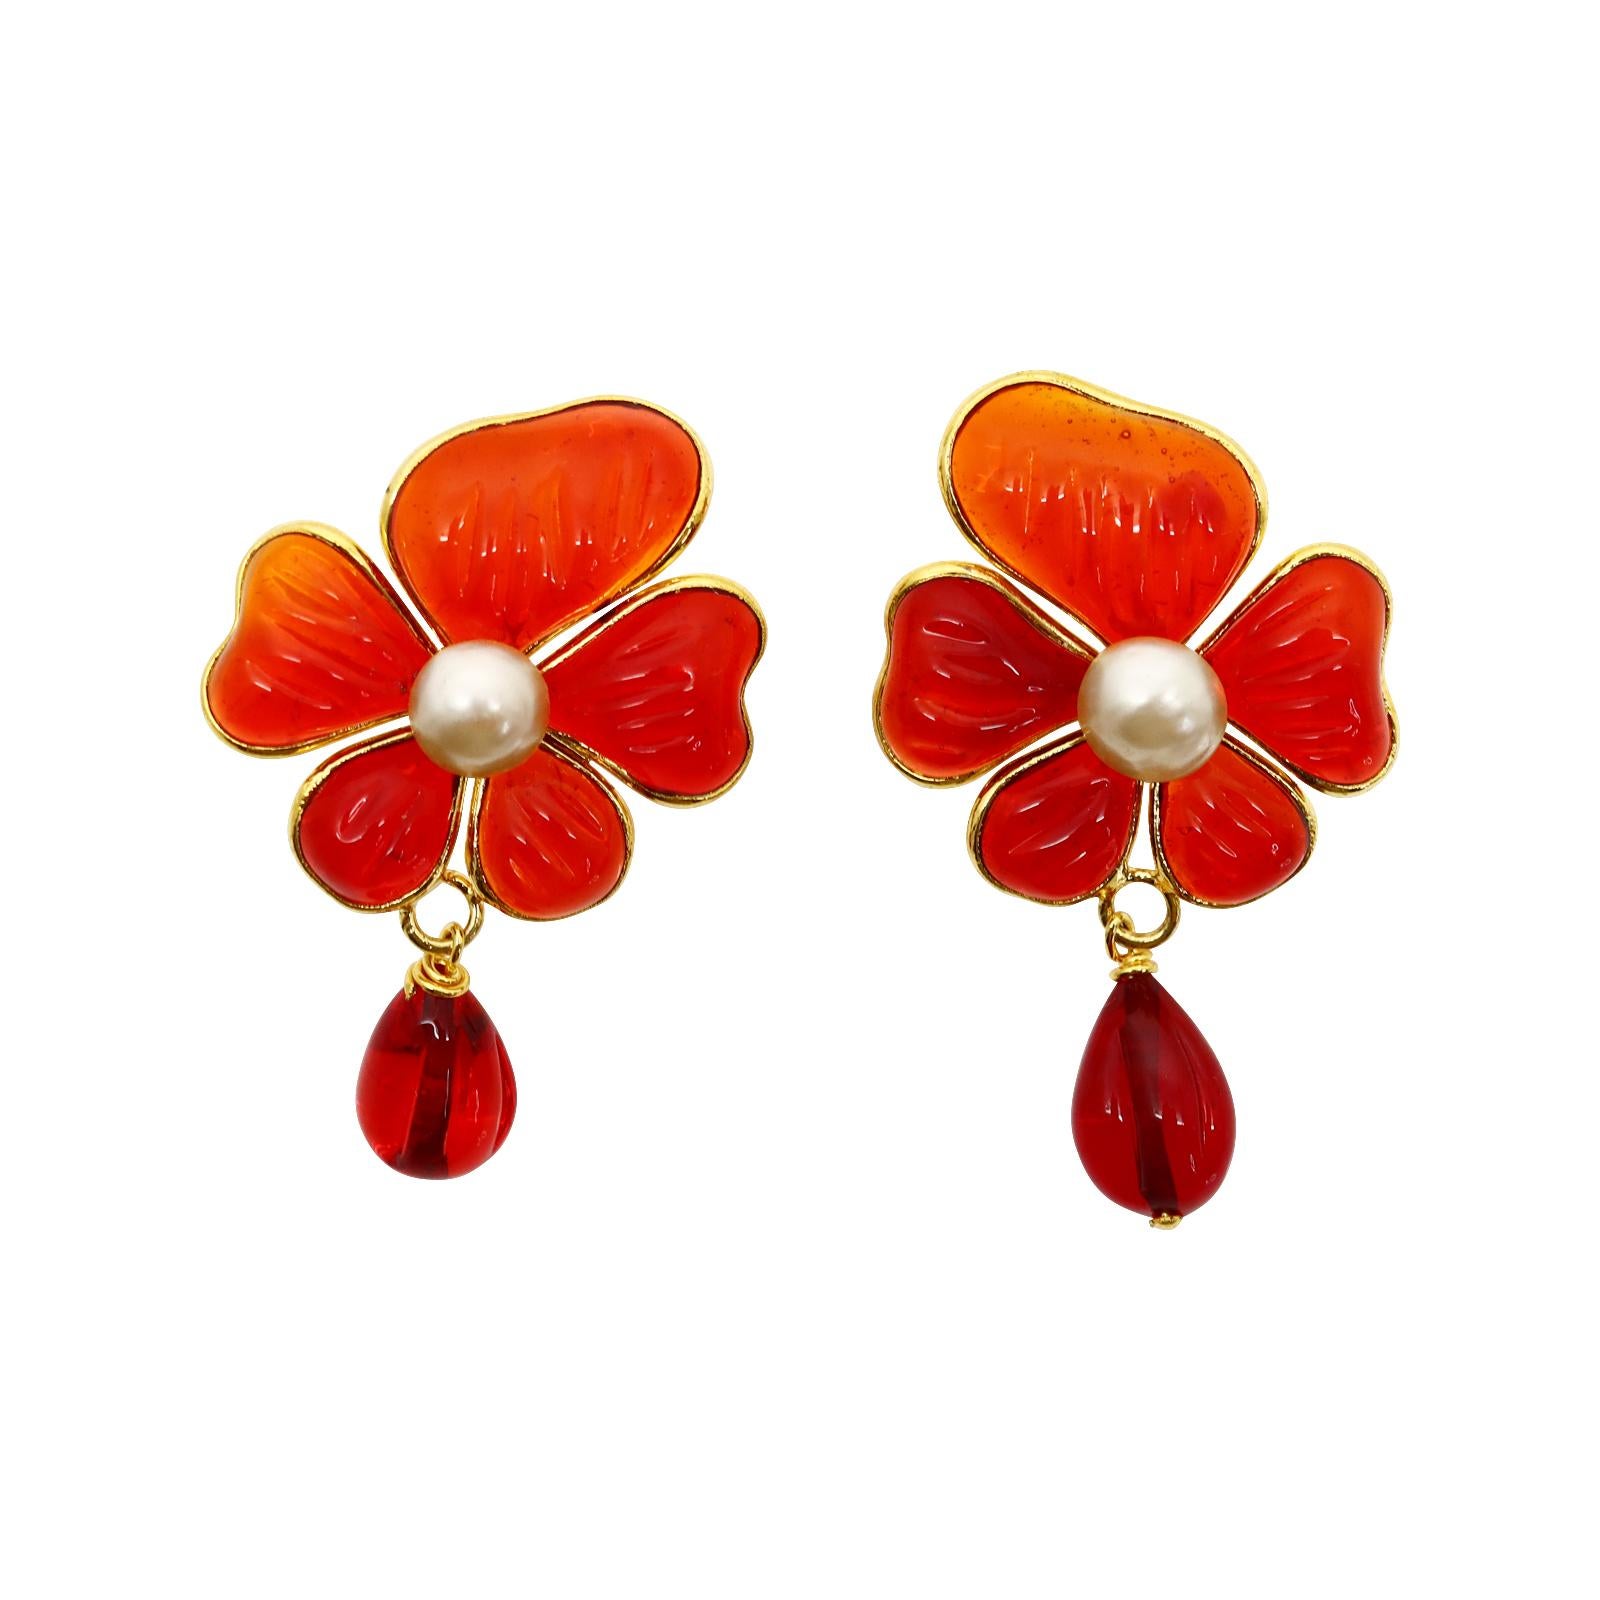 Modern Collectible Augustine Gripoix Red Pate De Verre Dangling Earrings Circa 2000s For Sale